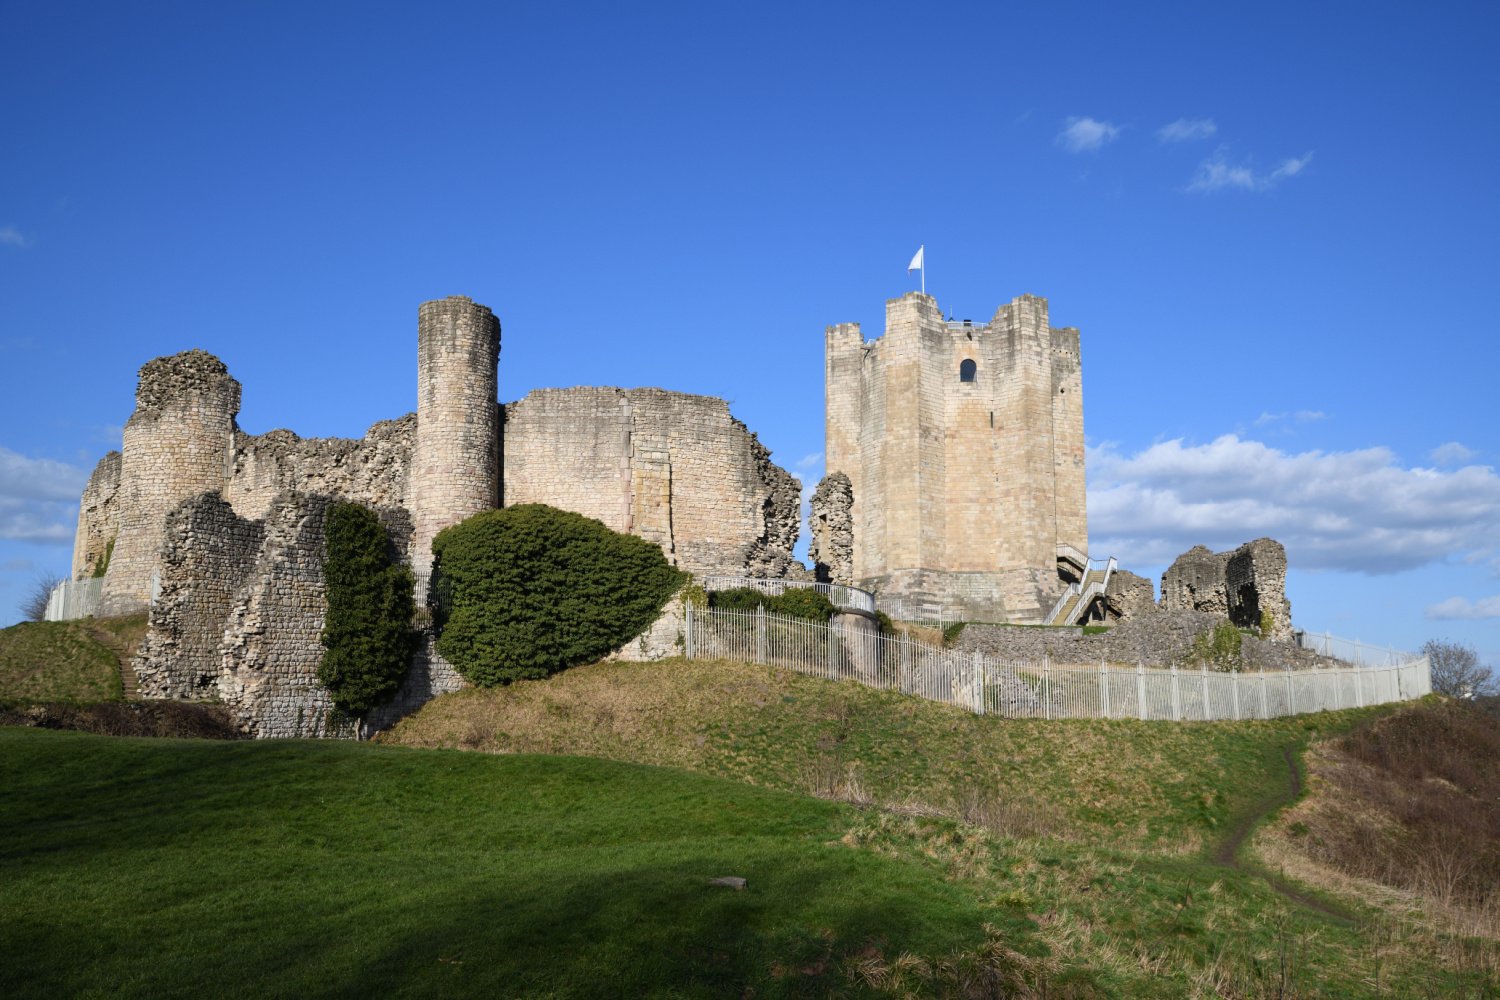 Image name conisbrough castle near doncaster south yorkshire the 19 image from the post A look at the history of Conisbrough Castle, with Dr Emma Wells in Yorkshire.com.